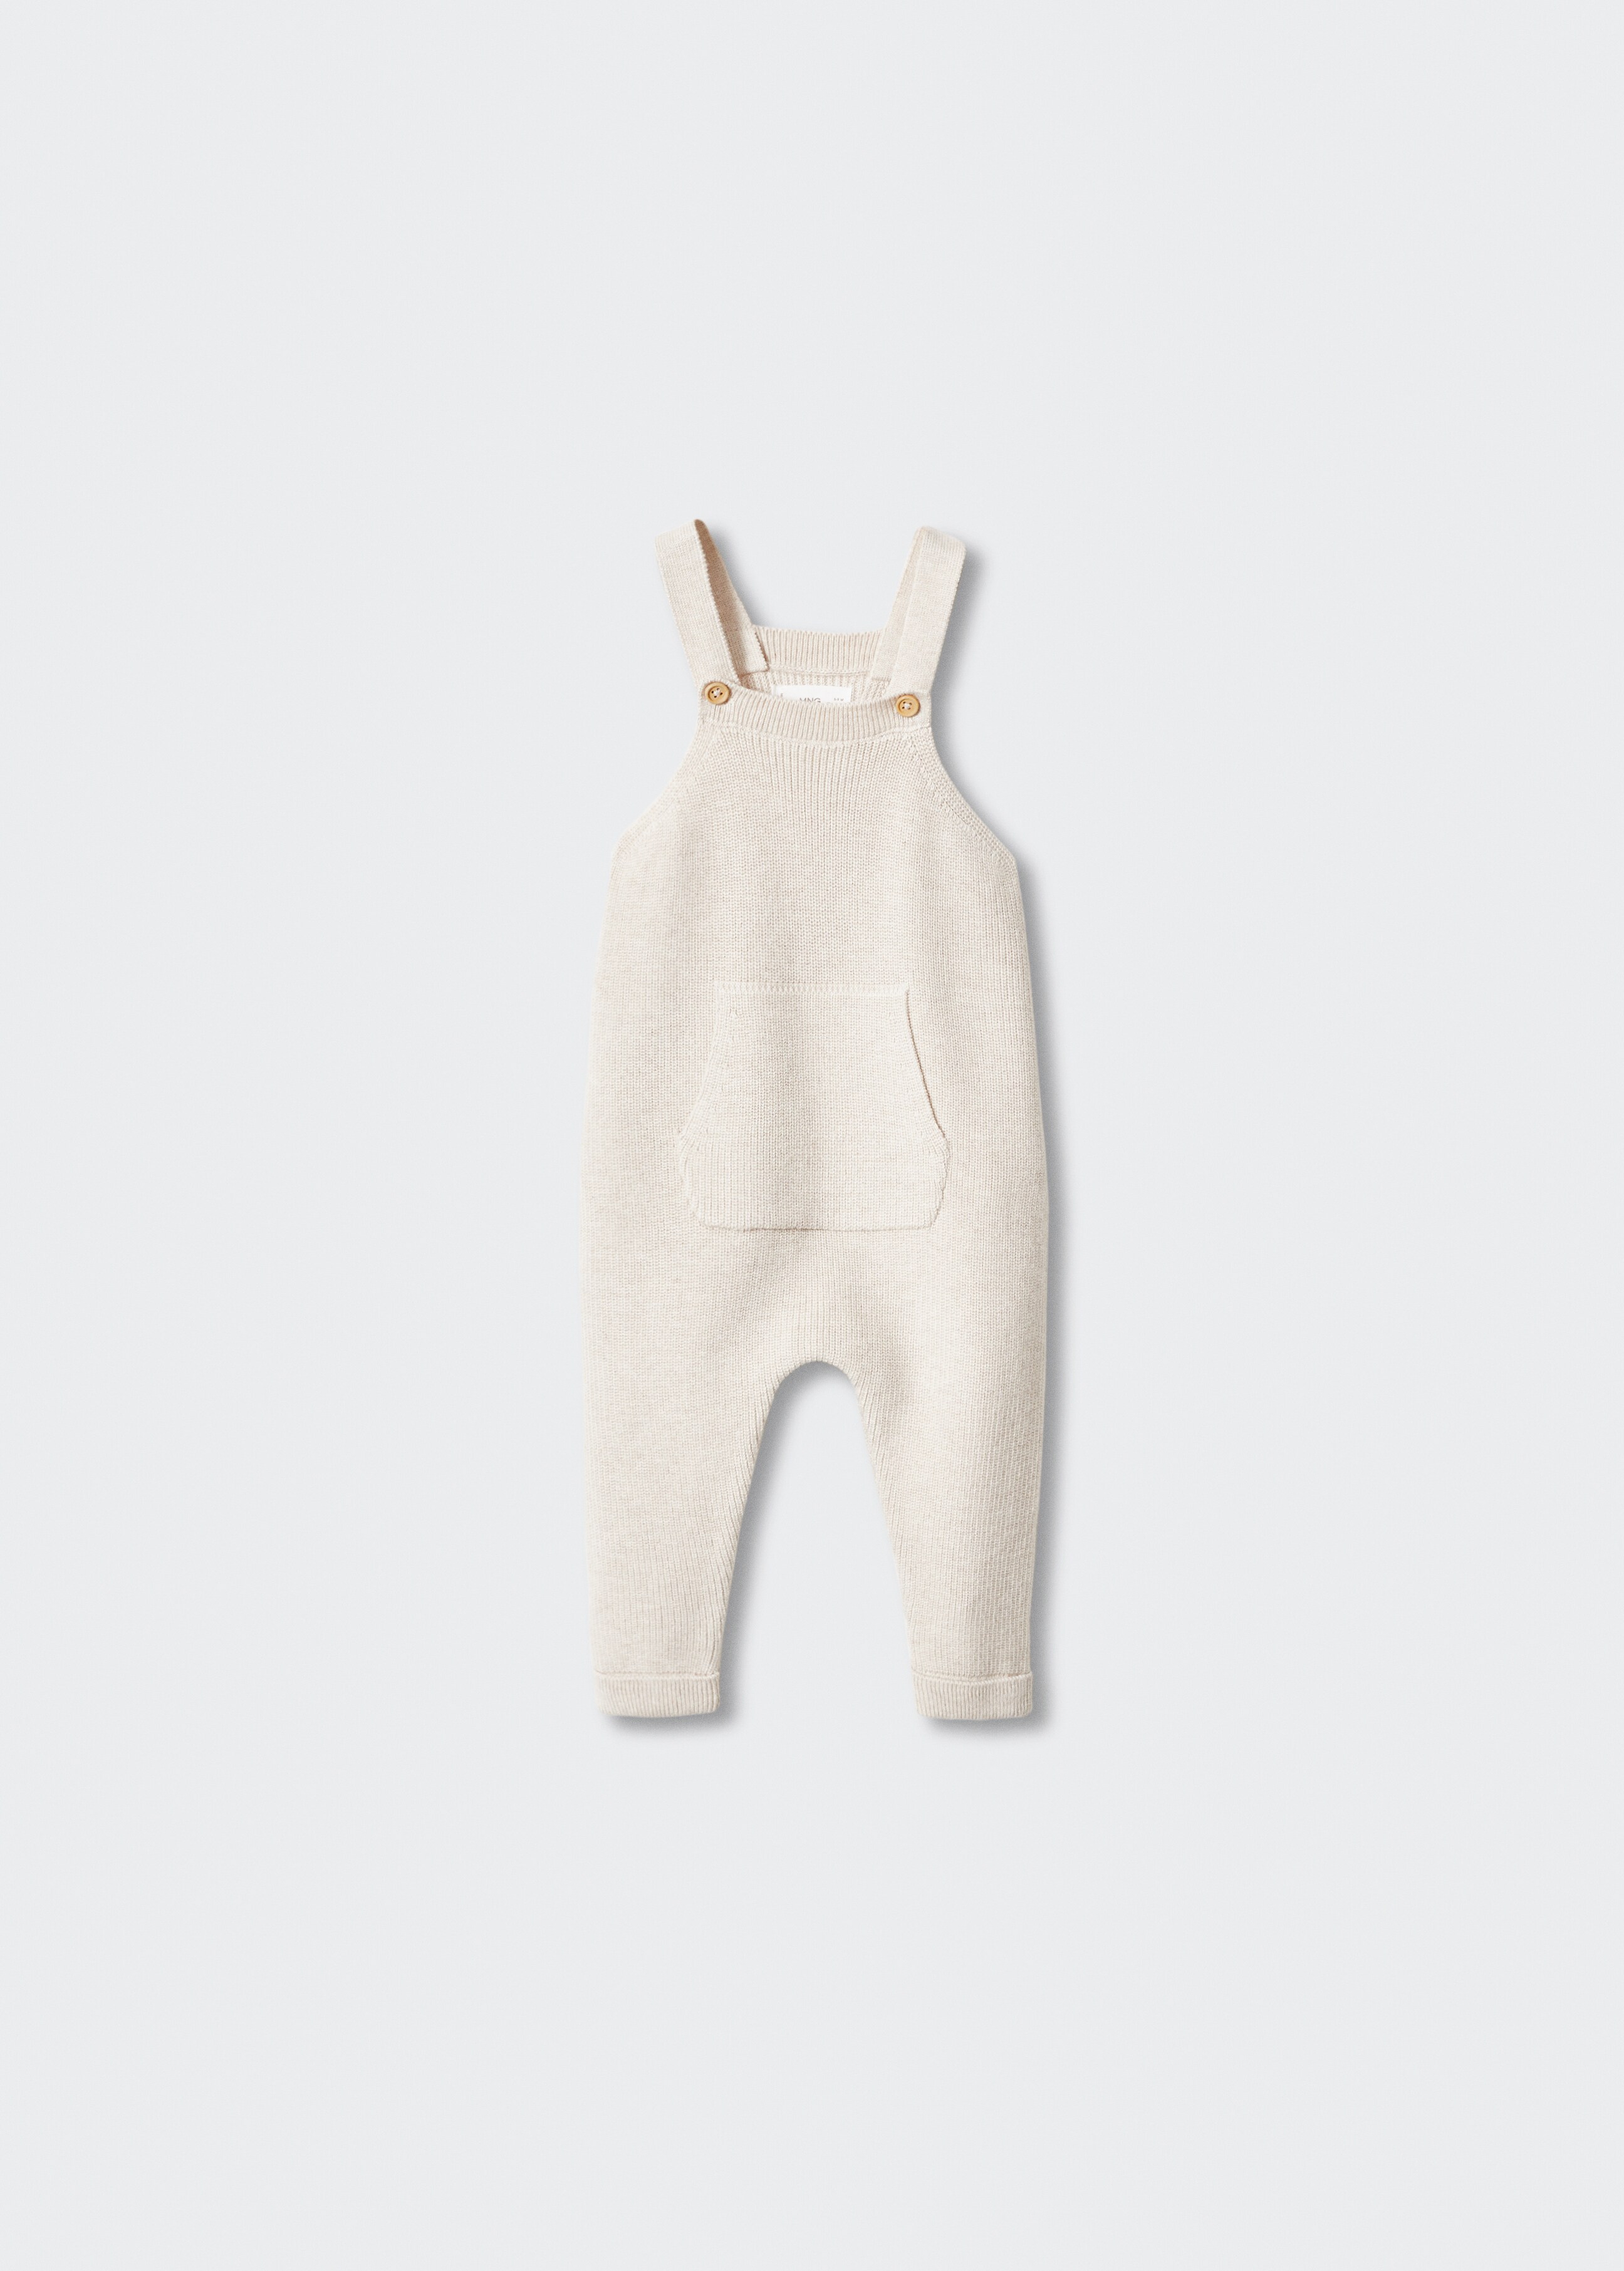 Cotton knit dungarees - Article without model